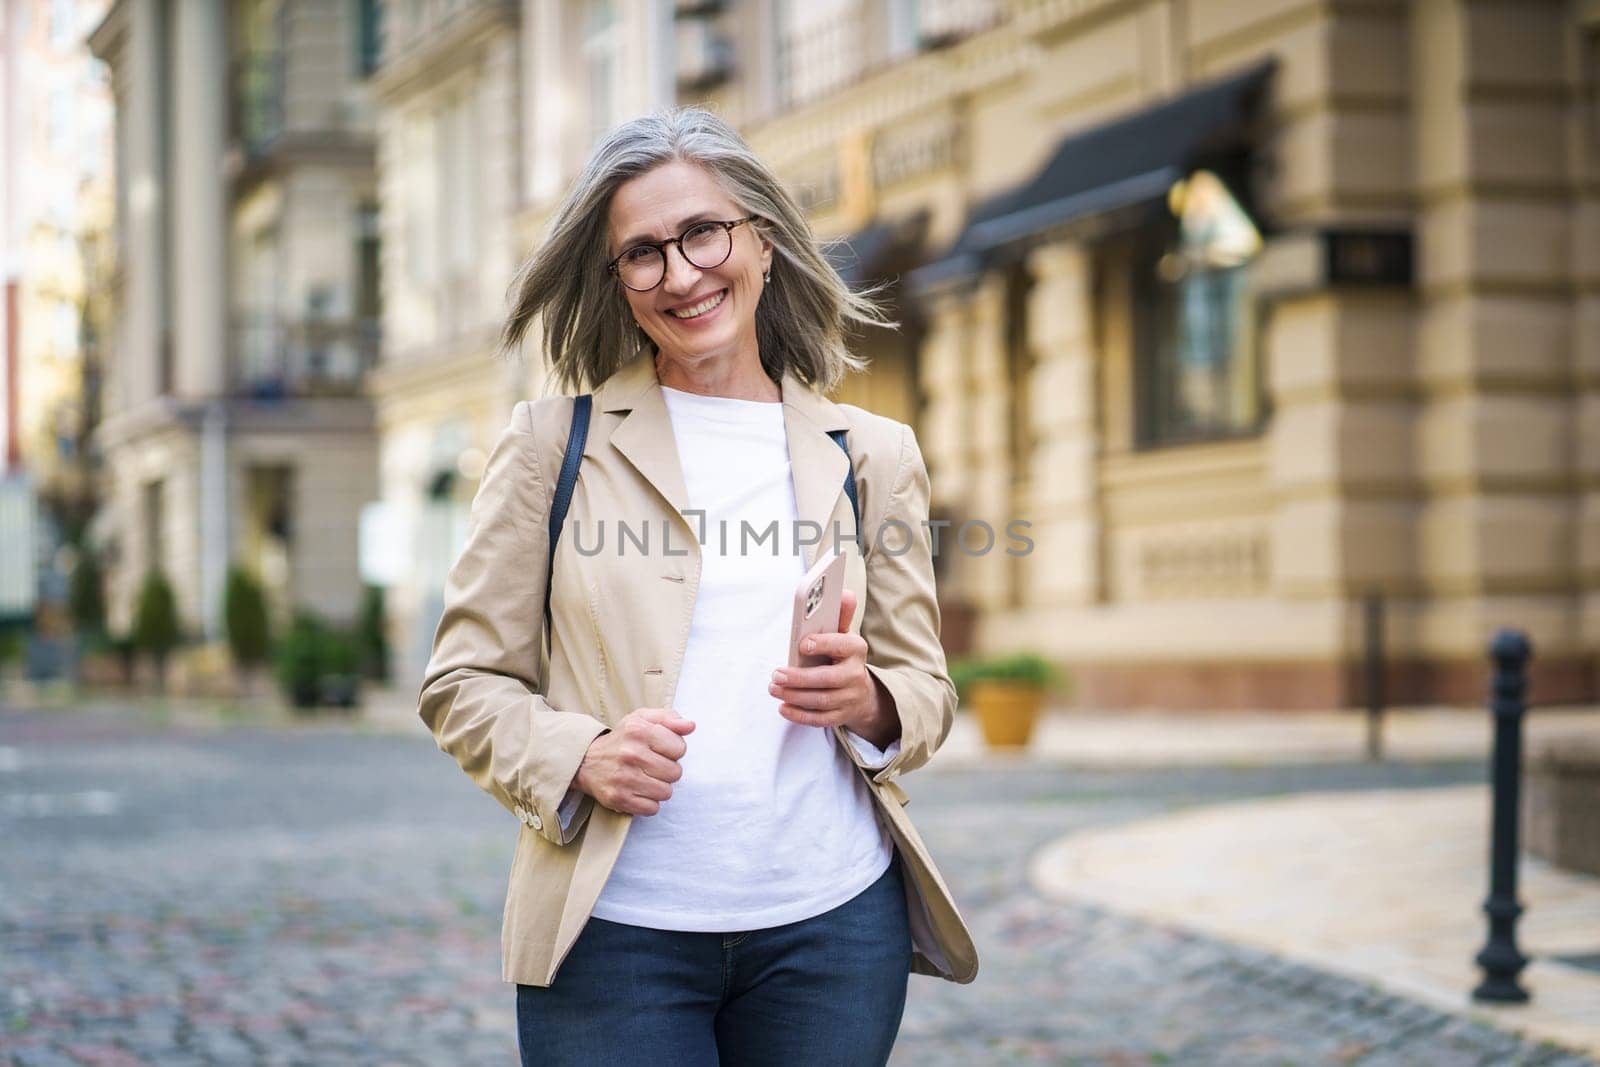 Joyful mature woman holds her phone while standing in old European city. This image captures the concept of happiness in the elderly. by LipikStockMedia